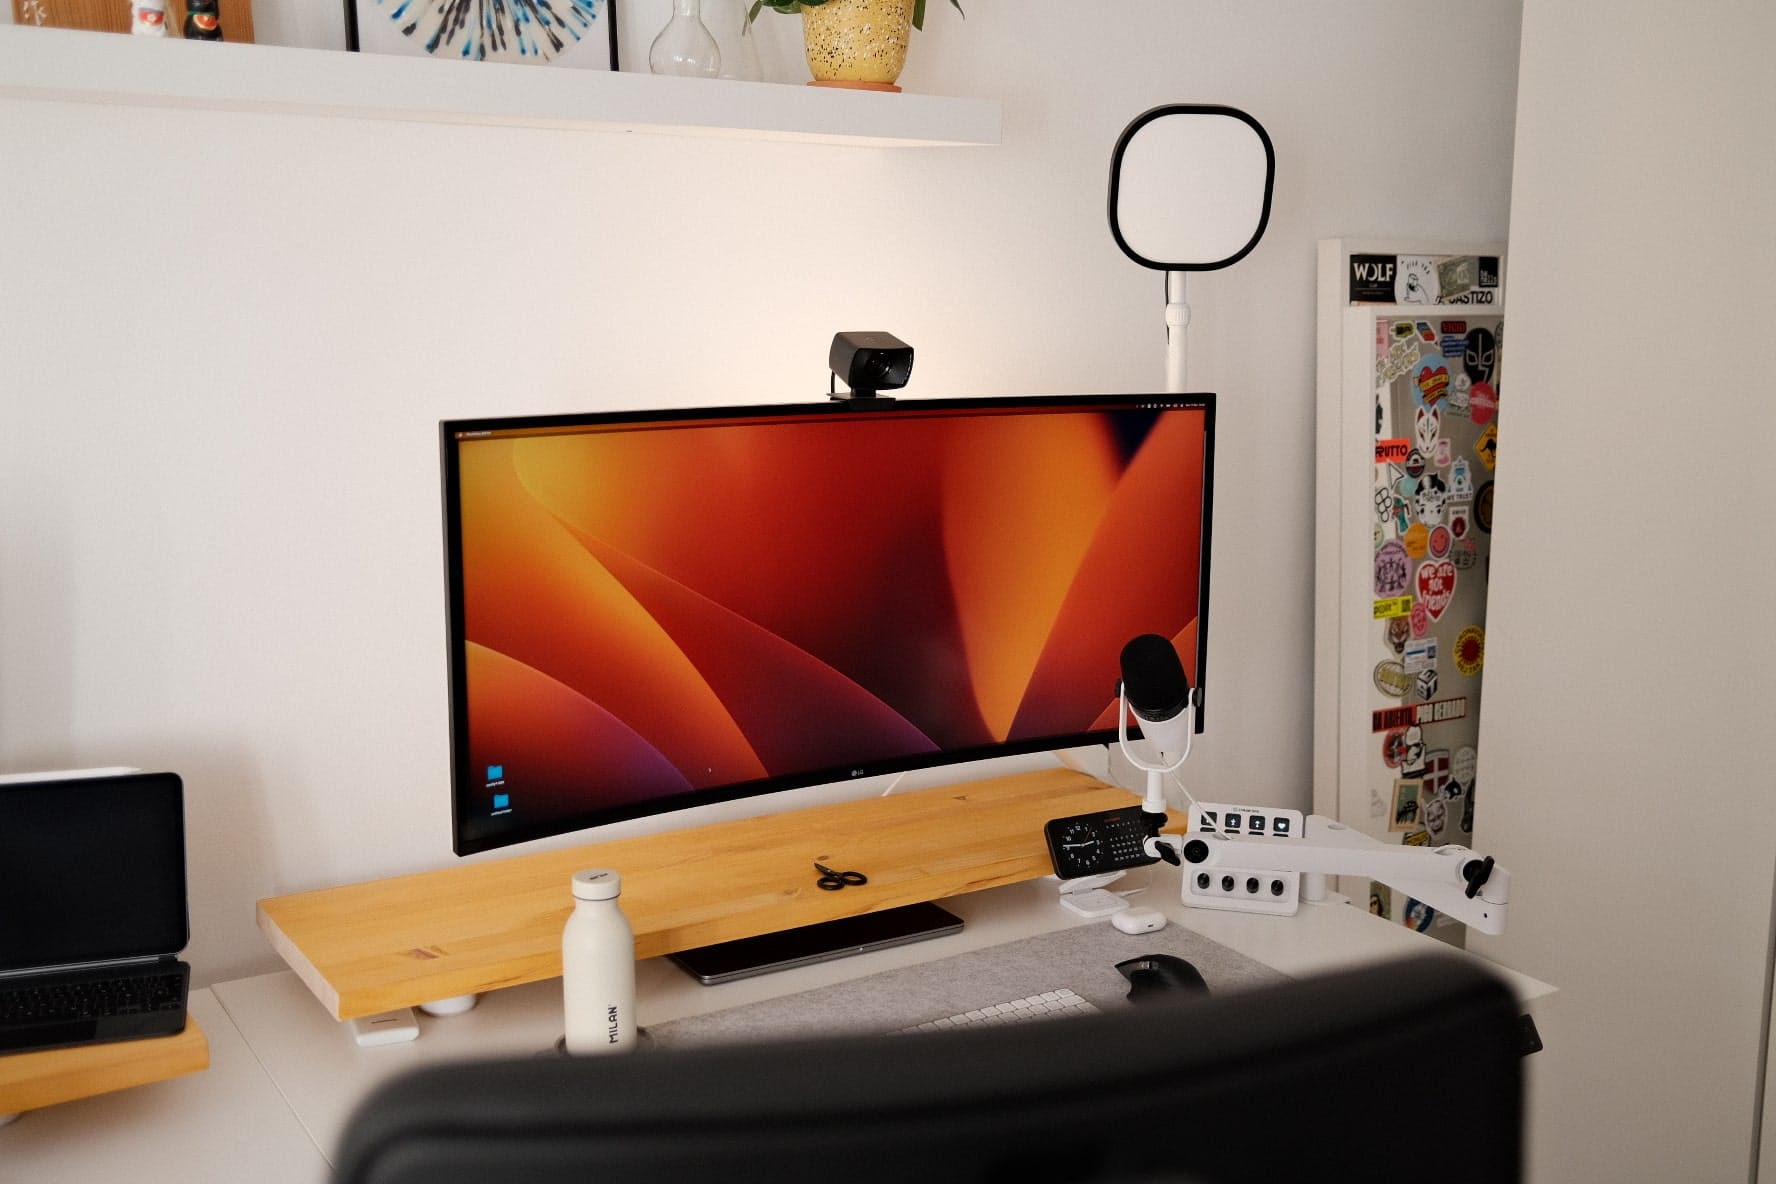 A desktop monitor with a webcam on top, a microphone on an adjustable arm, a ring light, and various desk accessories against a wall with decorative items